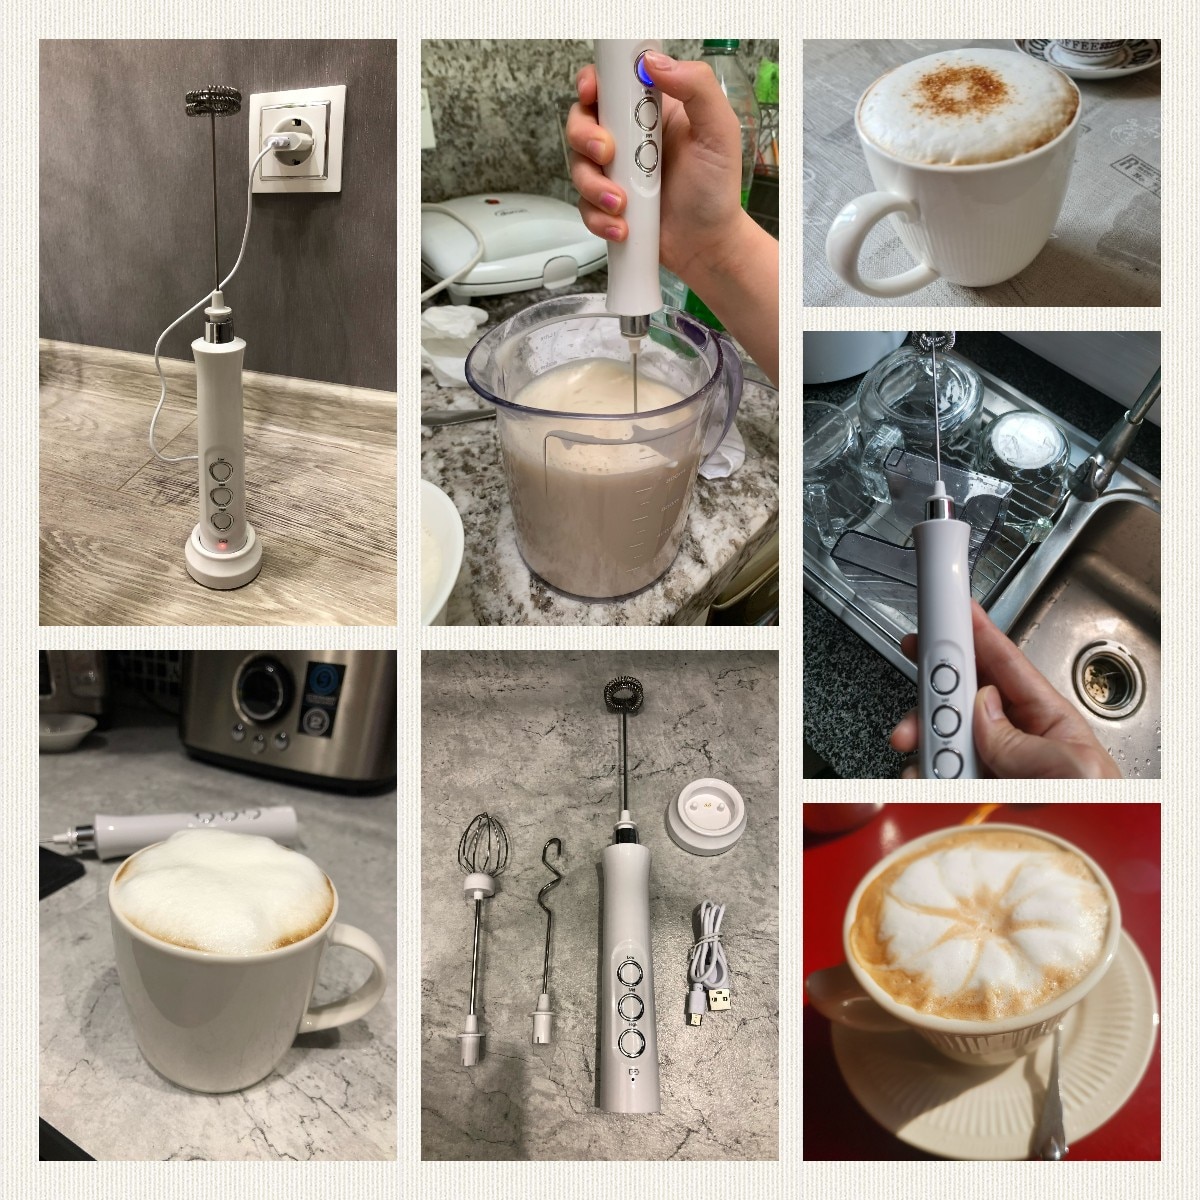 3 In 1 Portable Rechargeable Electric Milk Frother Foam Maker High Speeds Drink Mixer Handheld Foamer Coffee Frothing Wand